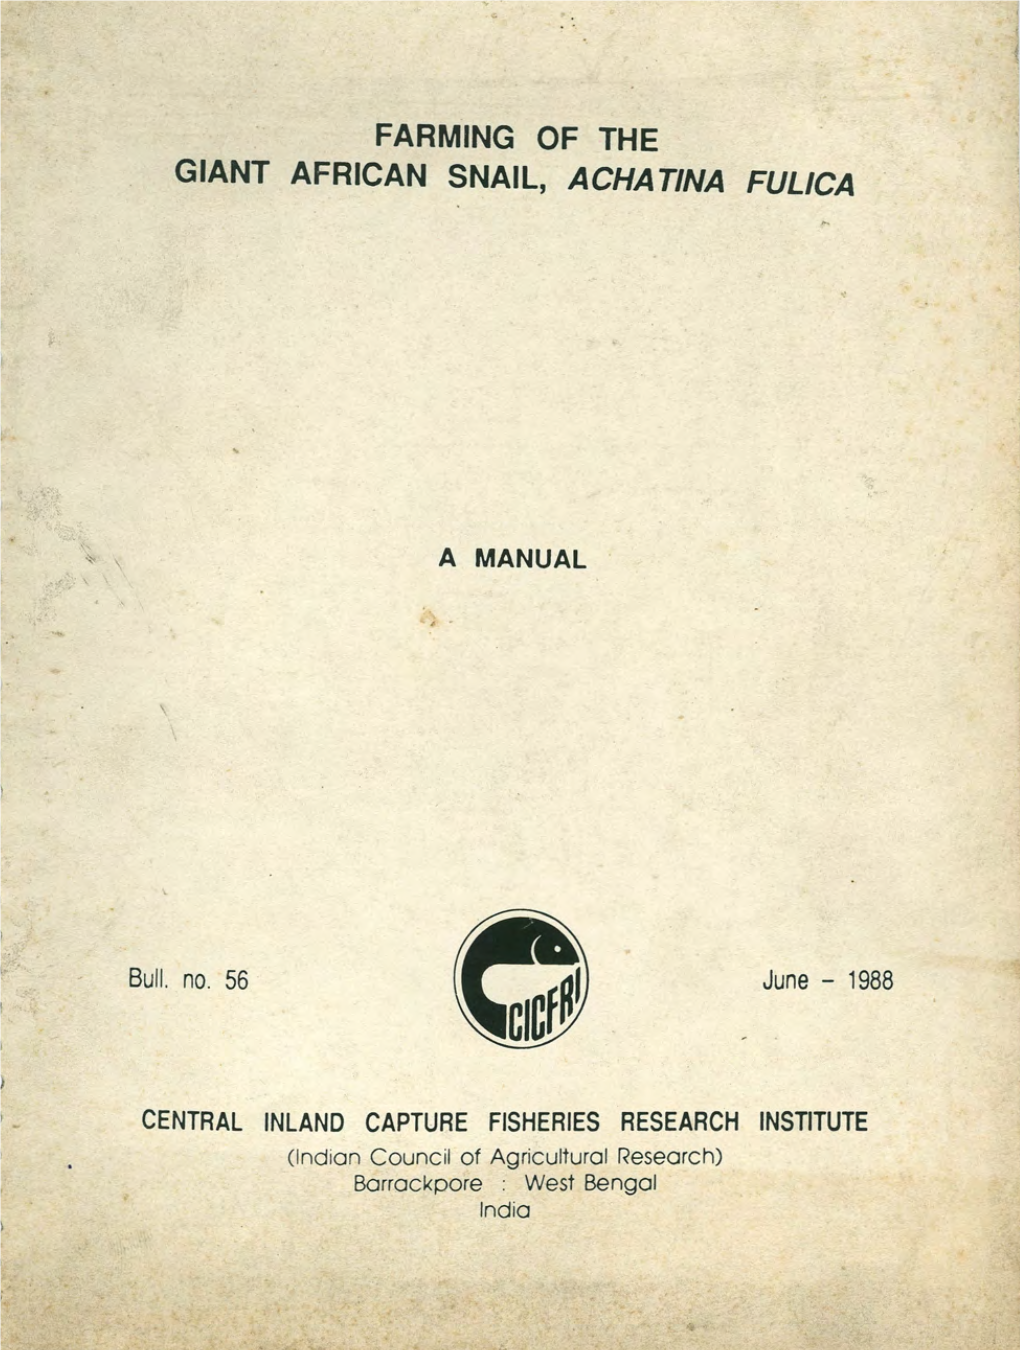 Farming of the Giant African Snail, Acha Tina Fulica